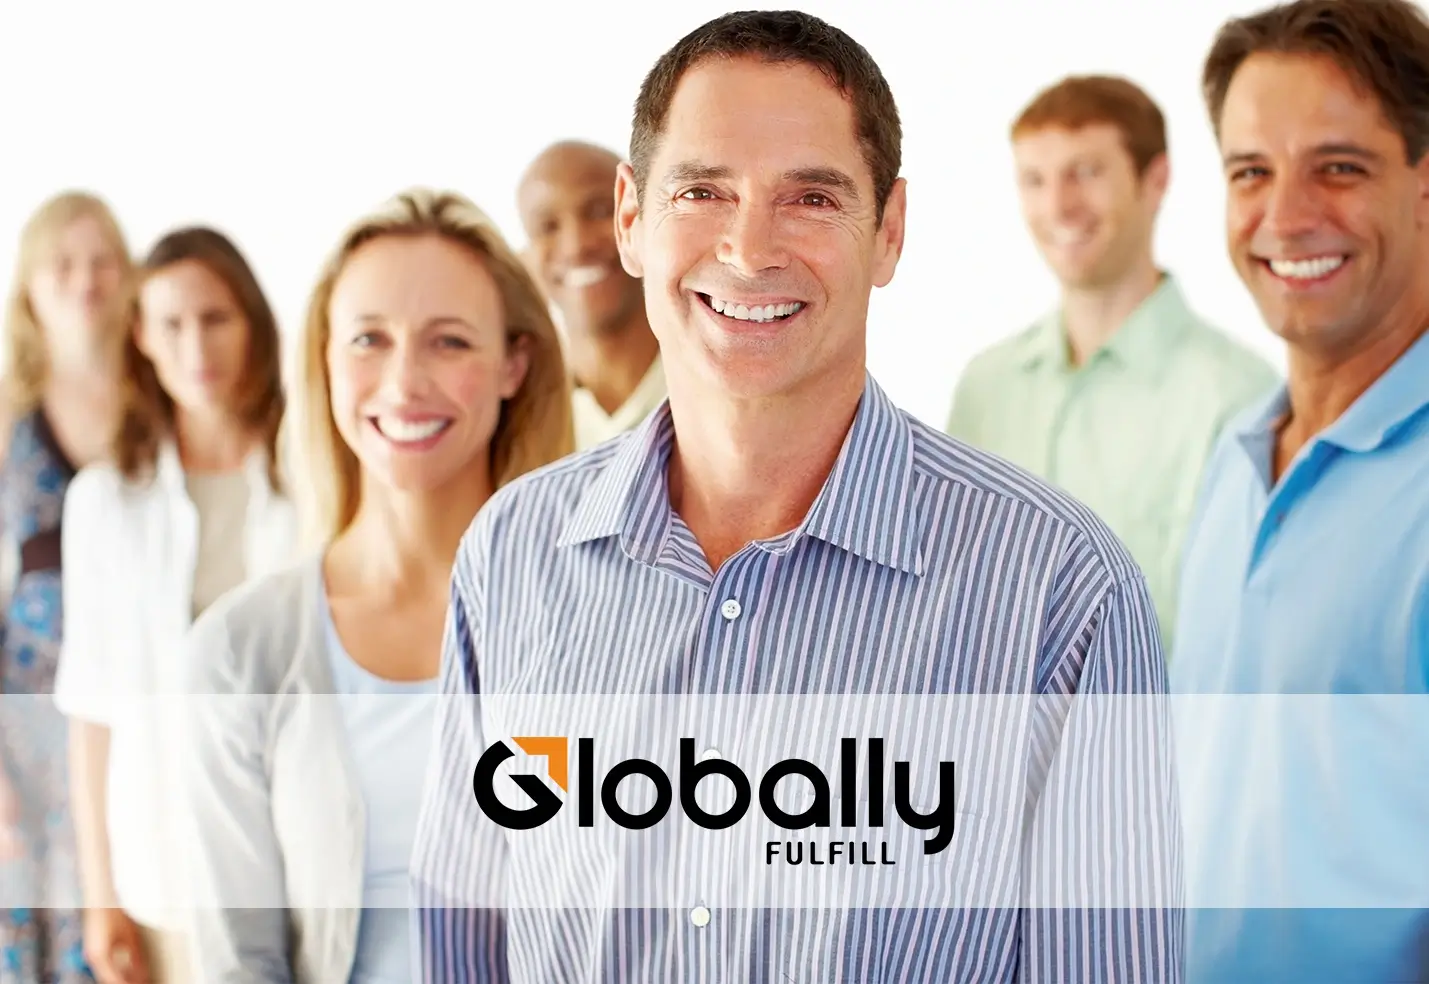 Your Quality Partners At GloballyFulfill